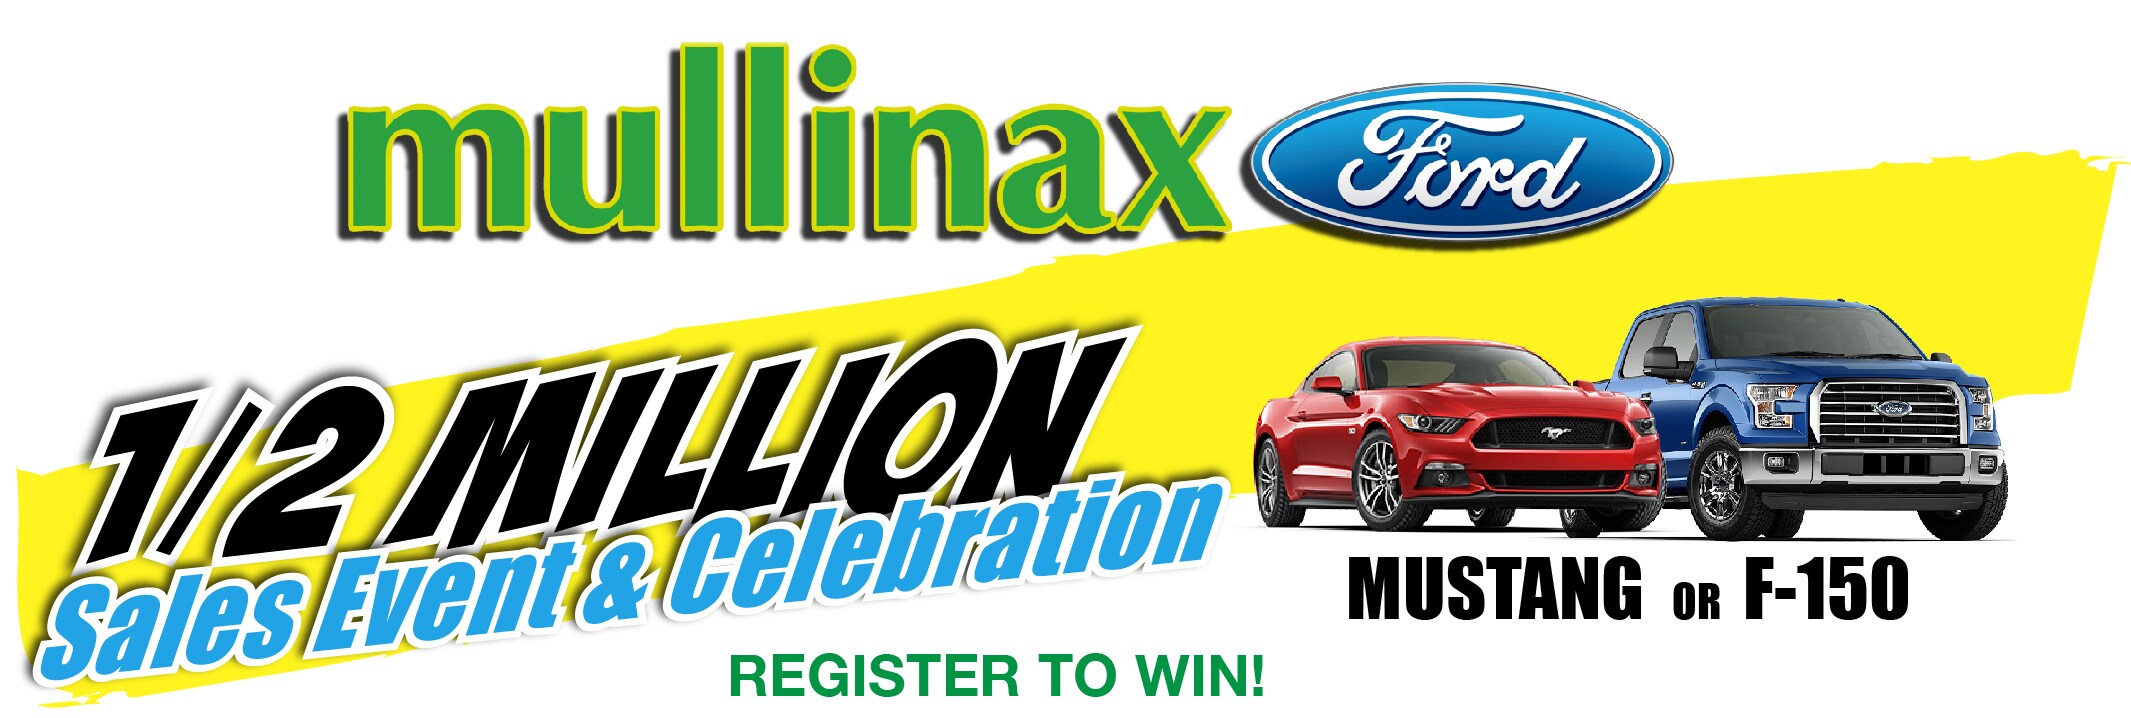 Mullinax ford of central florida apopka